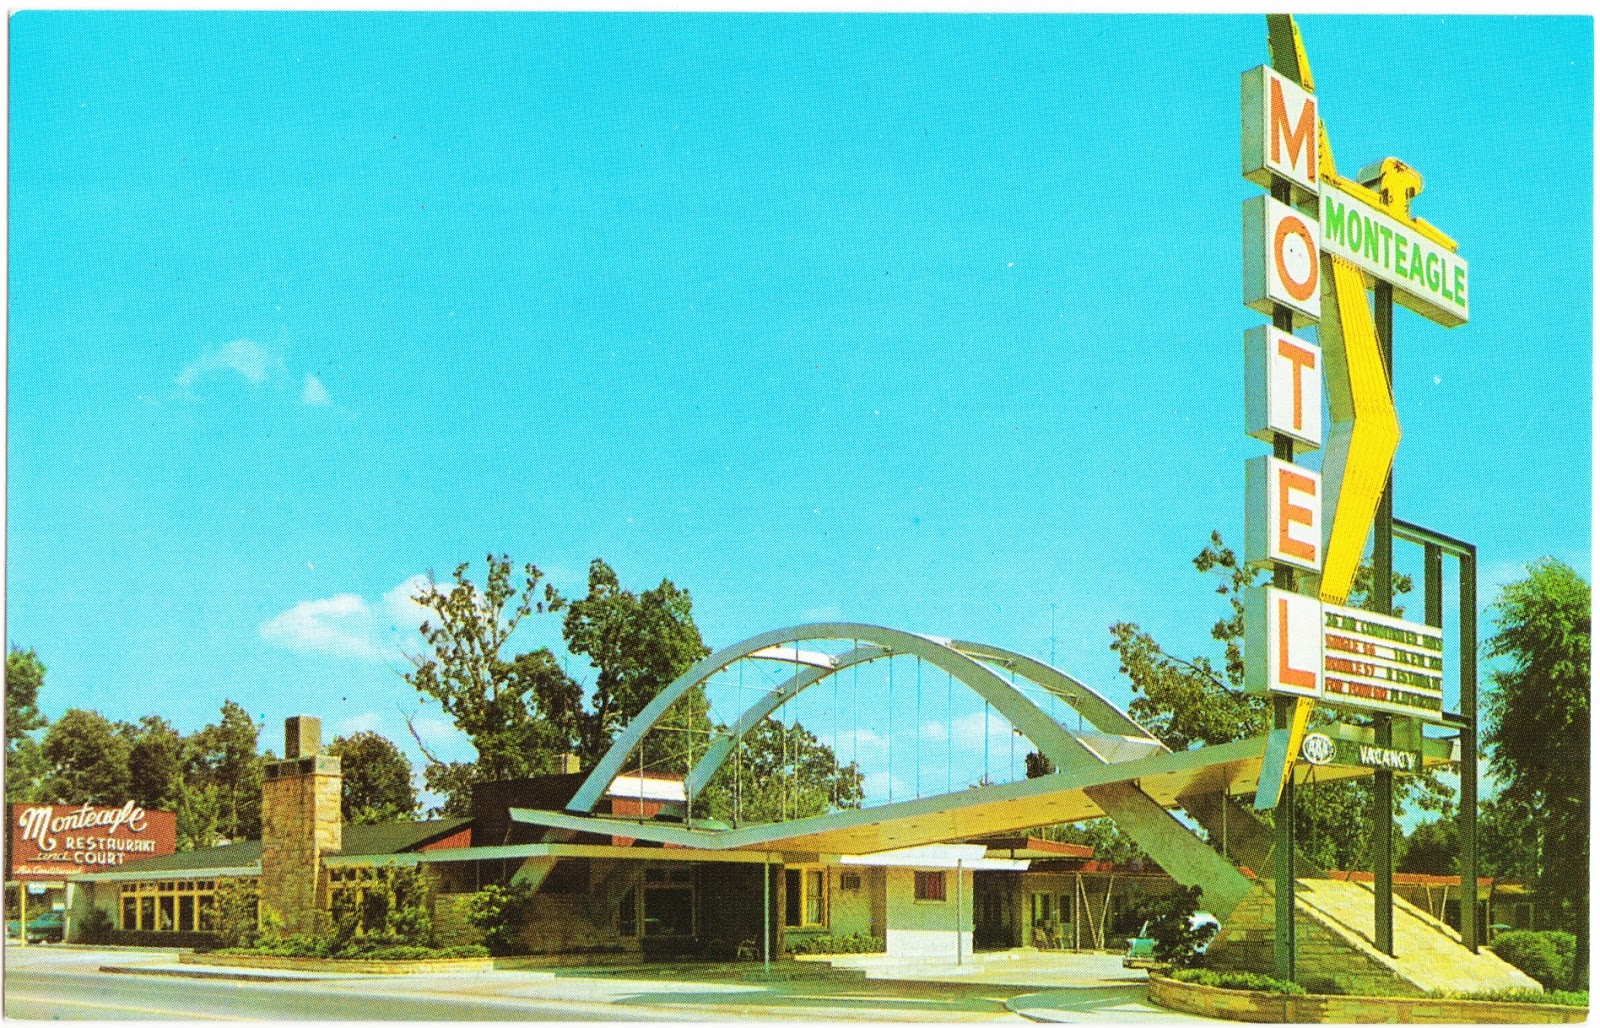 Monteagle Restaurant and Motel (Monteagle, Tennessee)